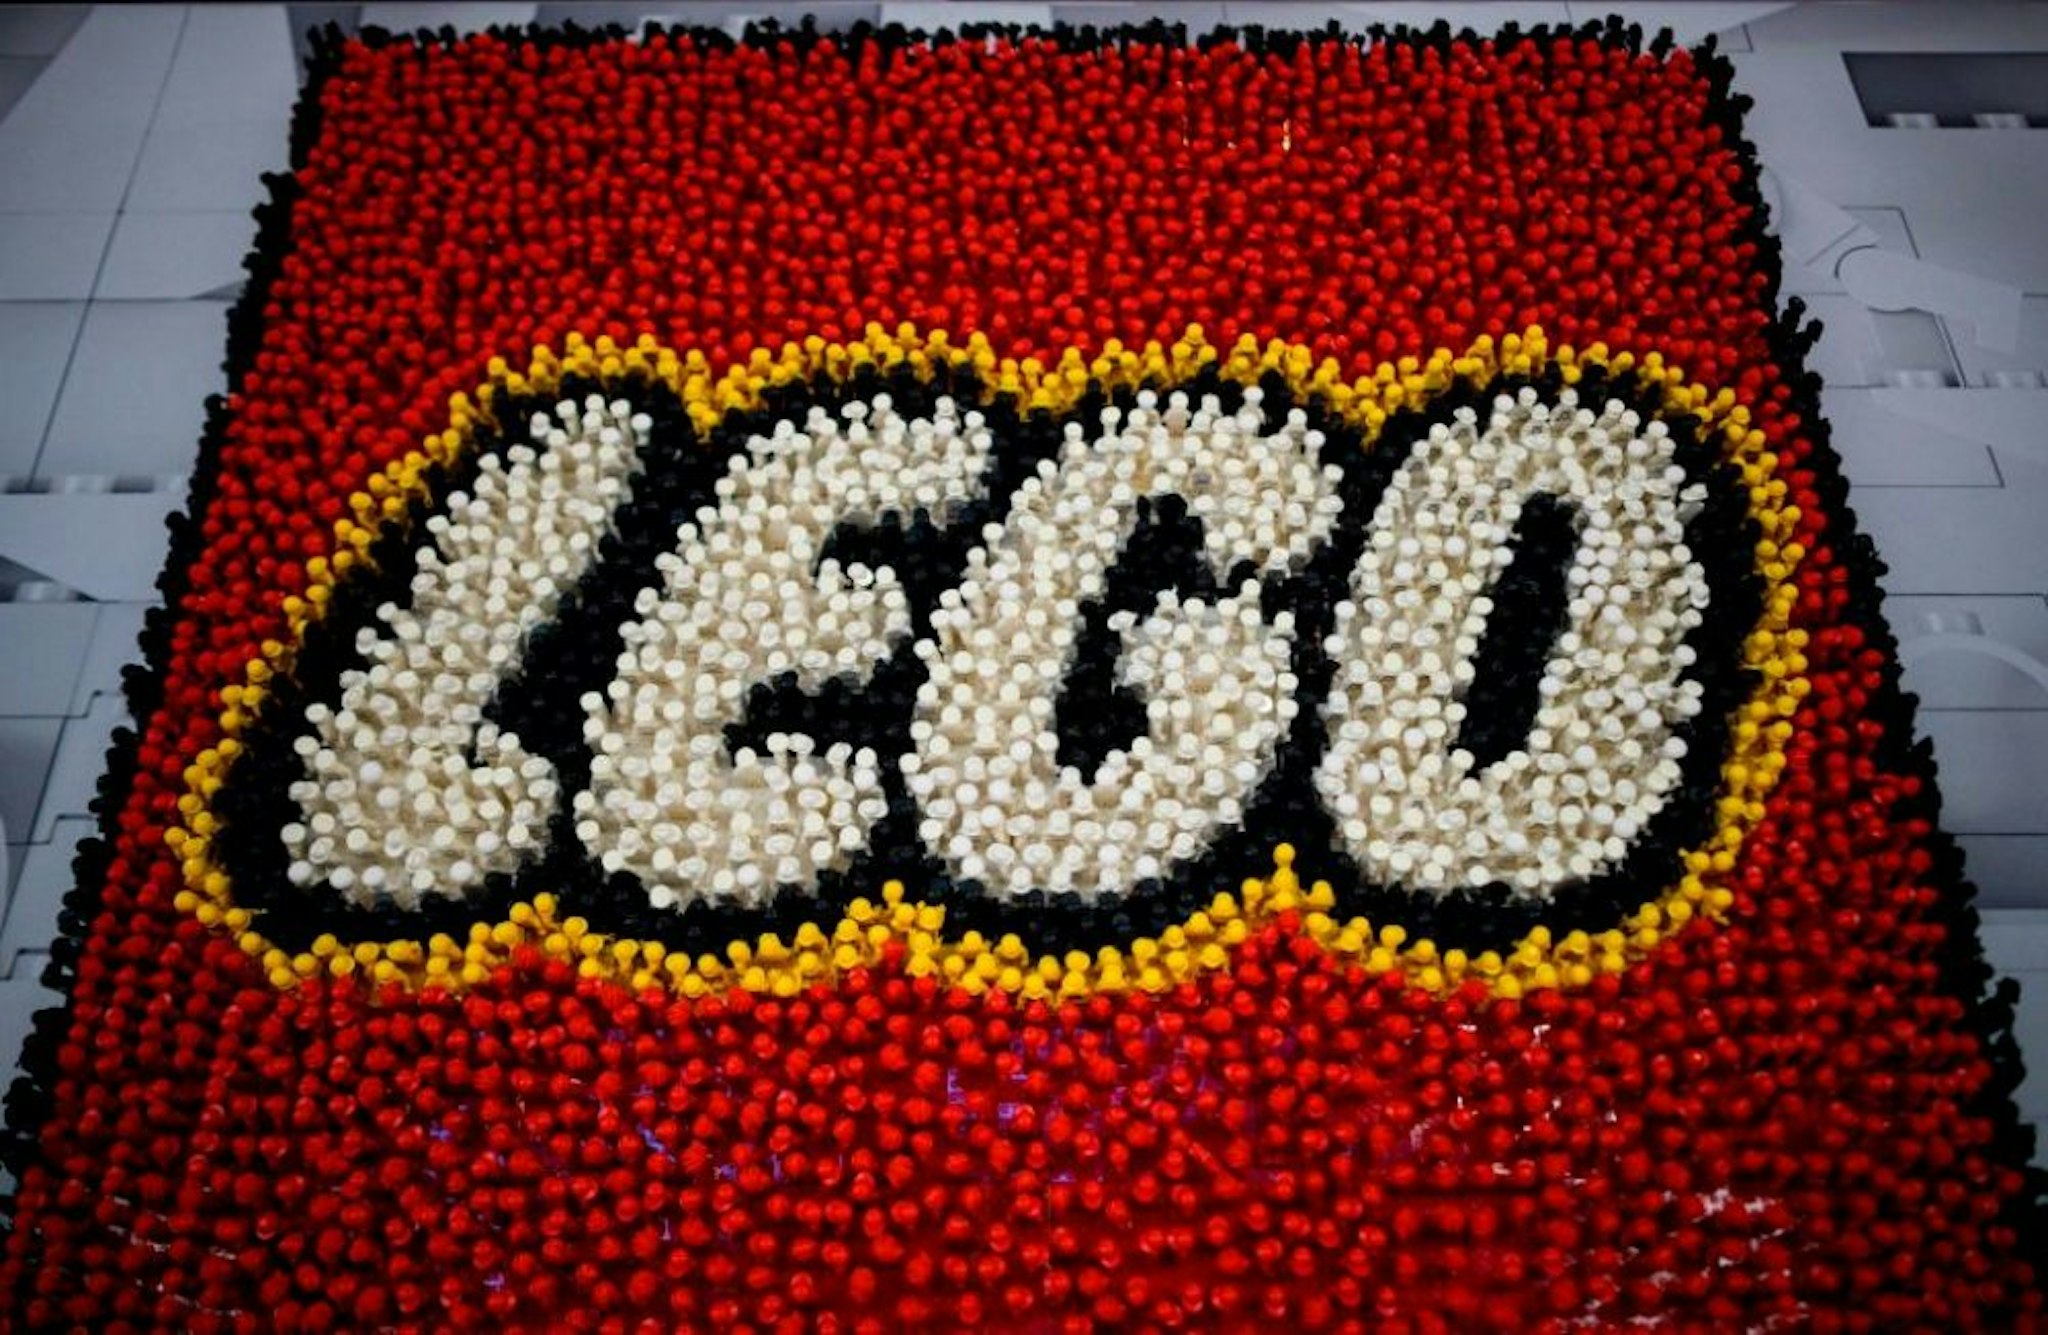 A Lego logo is pictured during the annual New York Toy Fair, at the Jacob K. Javits Convention Center on February 16, 2019 in New York City.